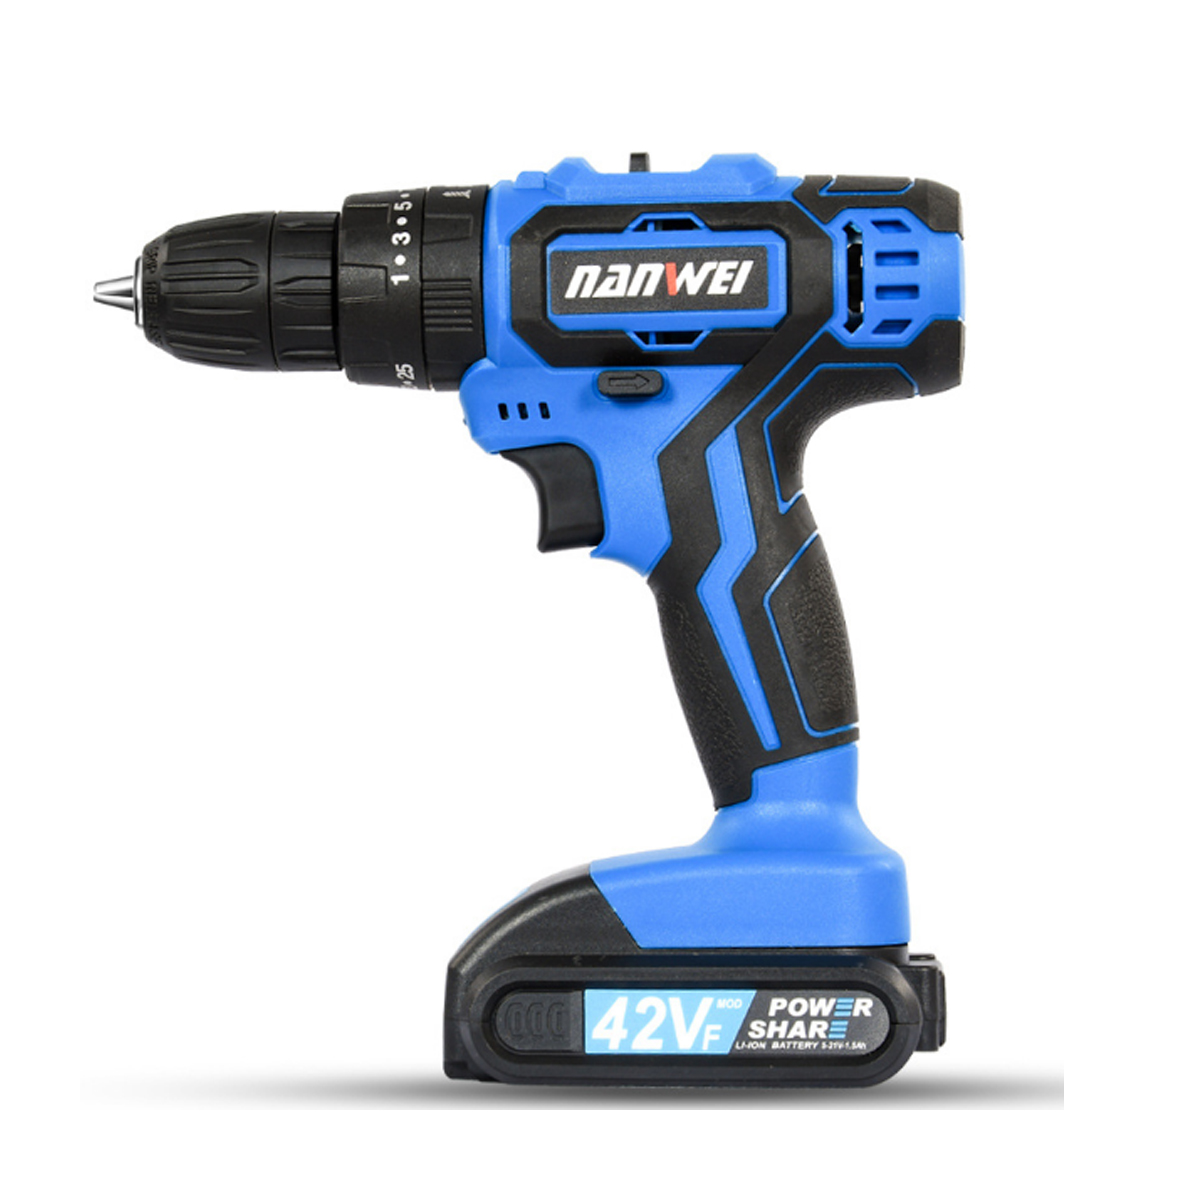 

42VF Cordless Electric Impact Drill 25+1 Torque Rechargeable 2 Speed Screwdriver W/ 1 or 2 Li-ion Battery